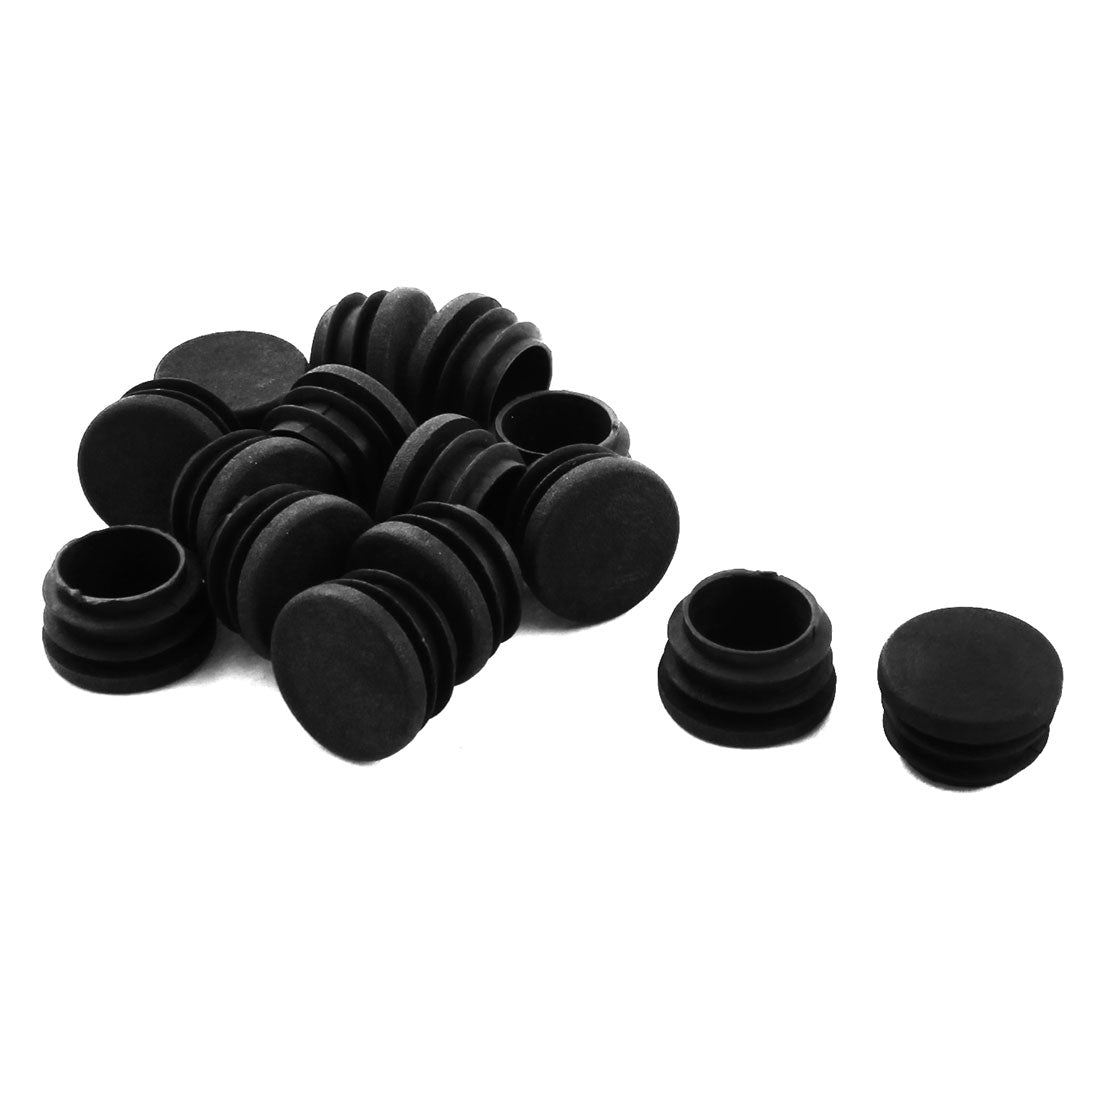 uxcell Uxcell Chair Table Legs 25mm Diameter Plastic Cap Round Tube Insert 15 Pcs